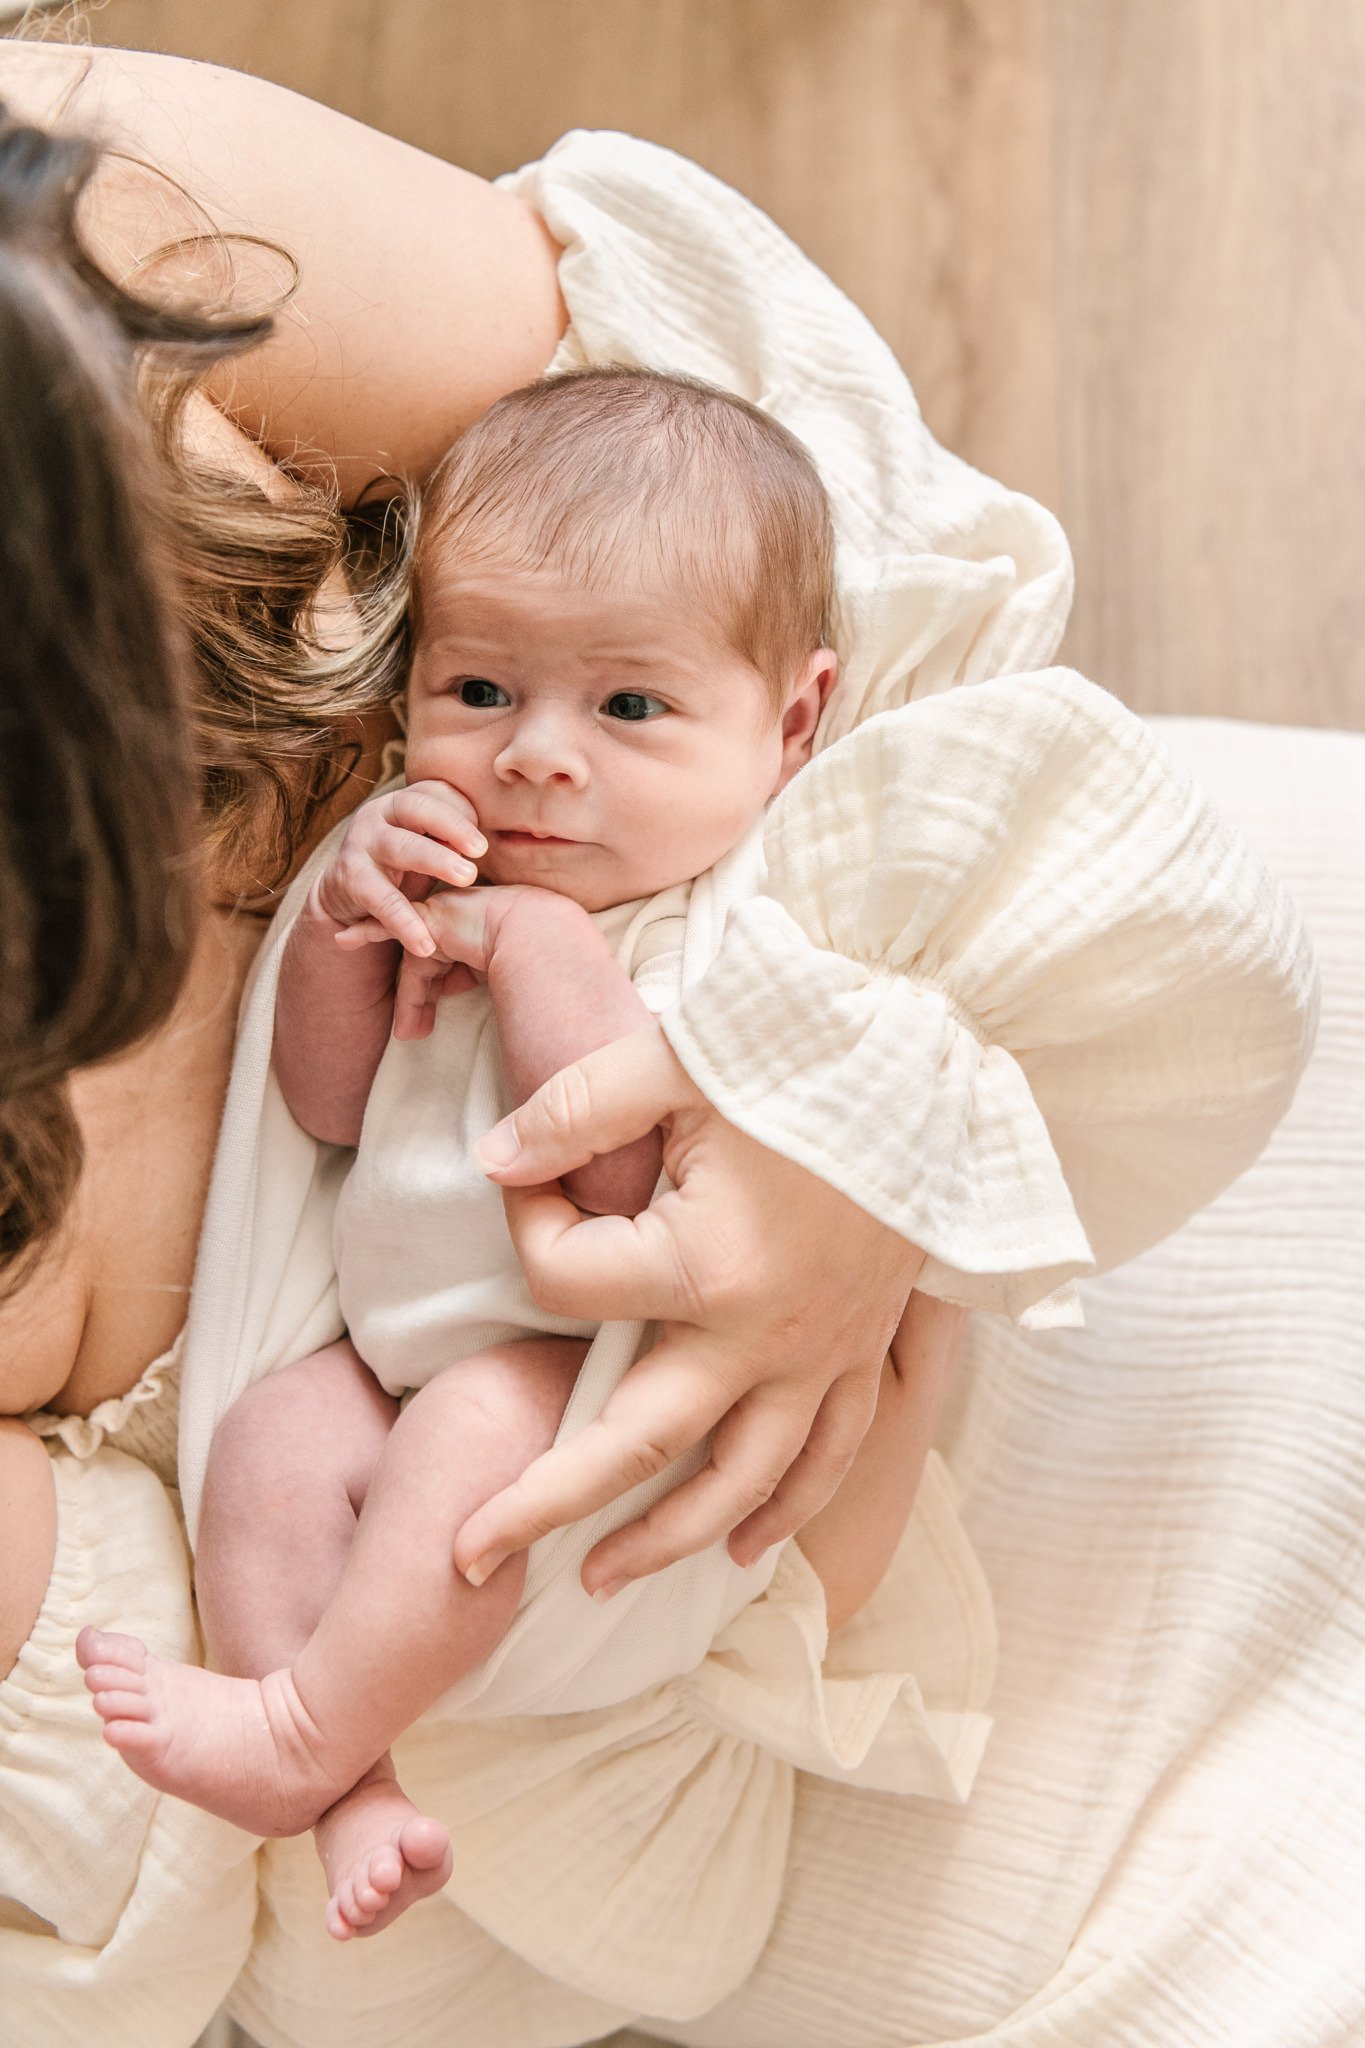  New Jersey photographer Nicole Hawkins Photography captures a newborn baby looking up at her mother. baby girl and momma sweet new baby #NicoleHawkinsPhotography #NicoleHawkinsNewborns #Babygirl #inhomenewbornsNJ #homenewbonportraits #inhomenewborns